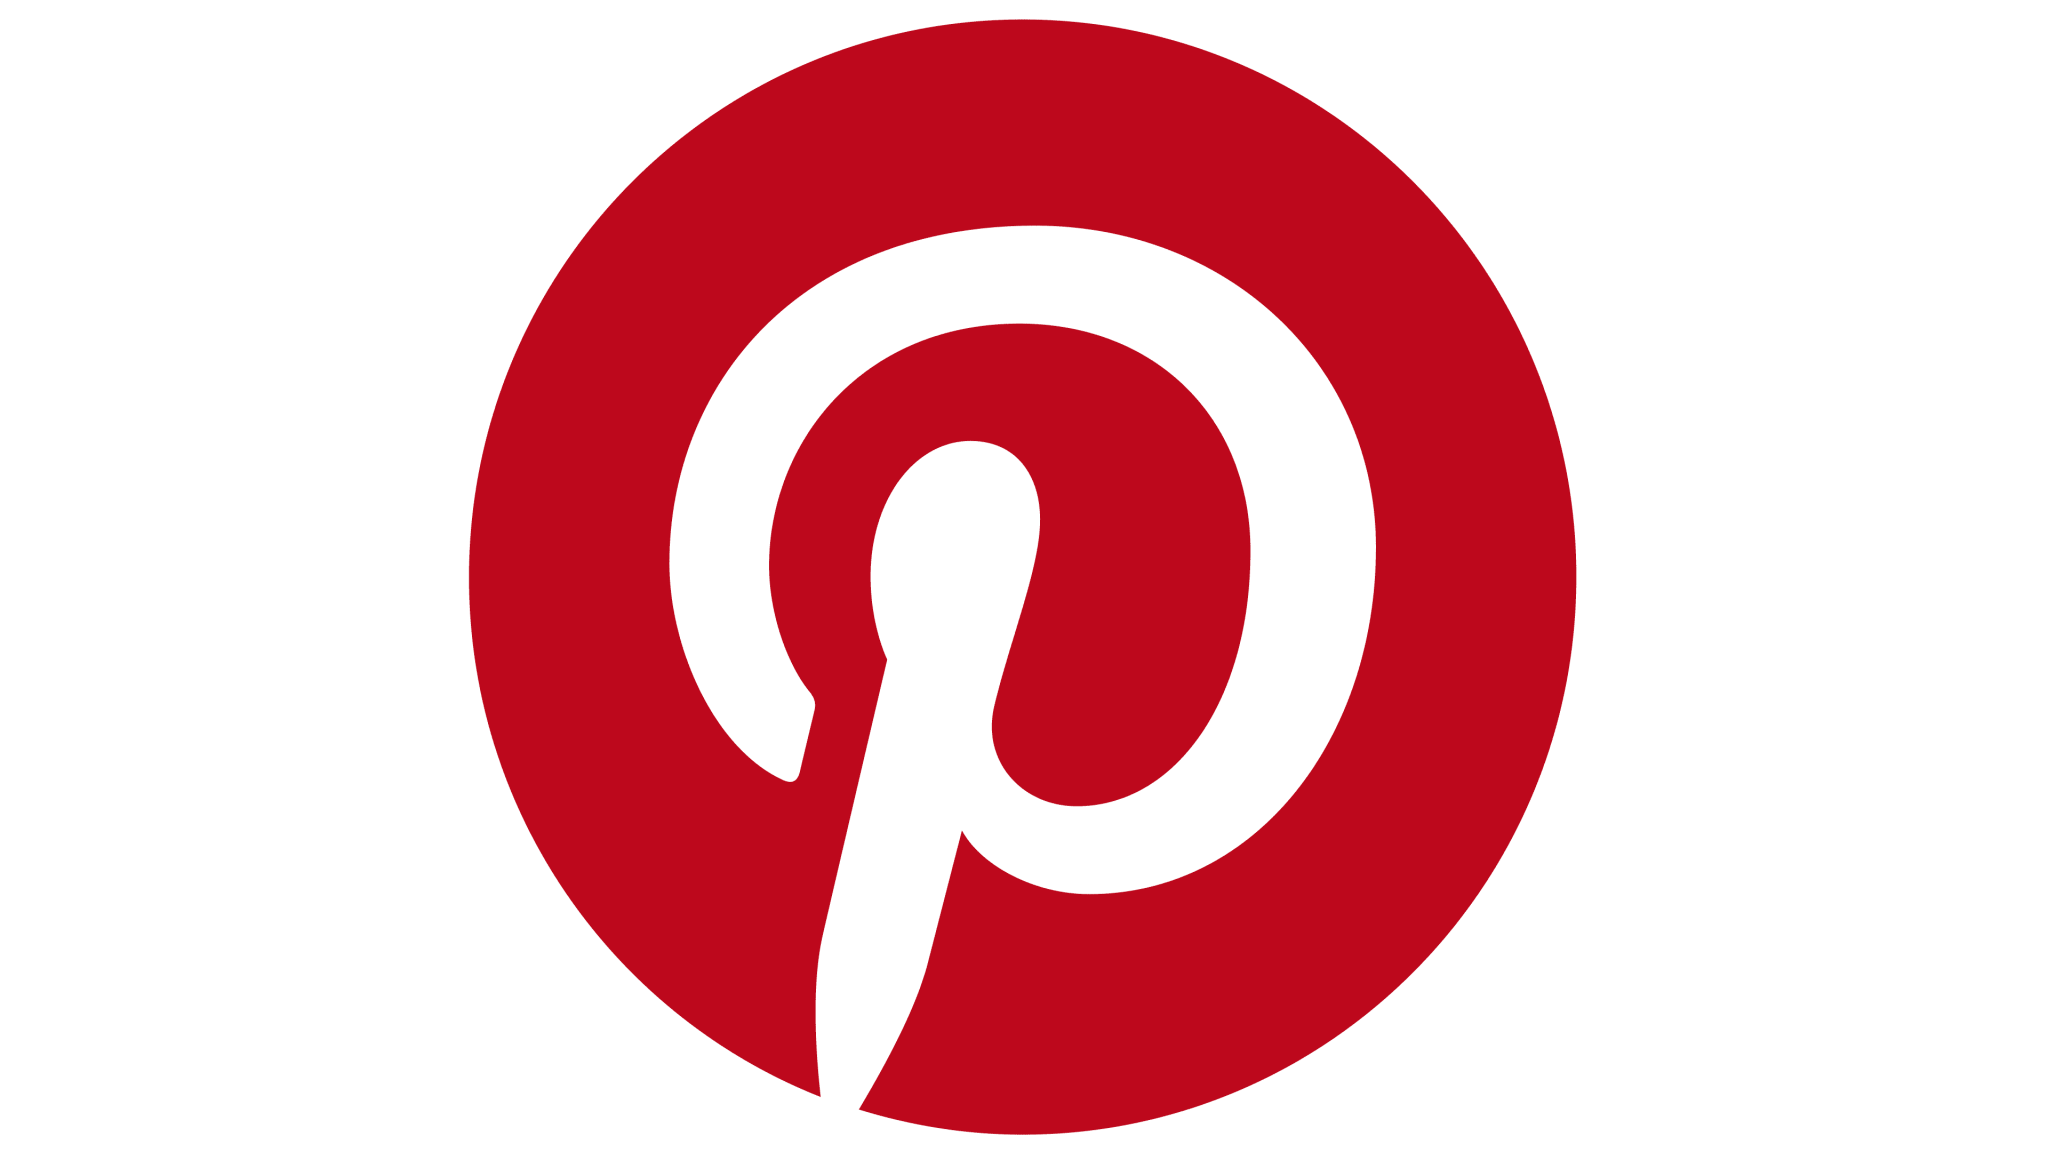 how to download video from pinterest